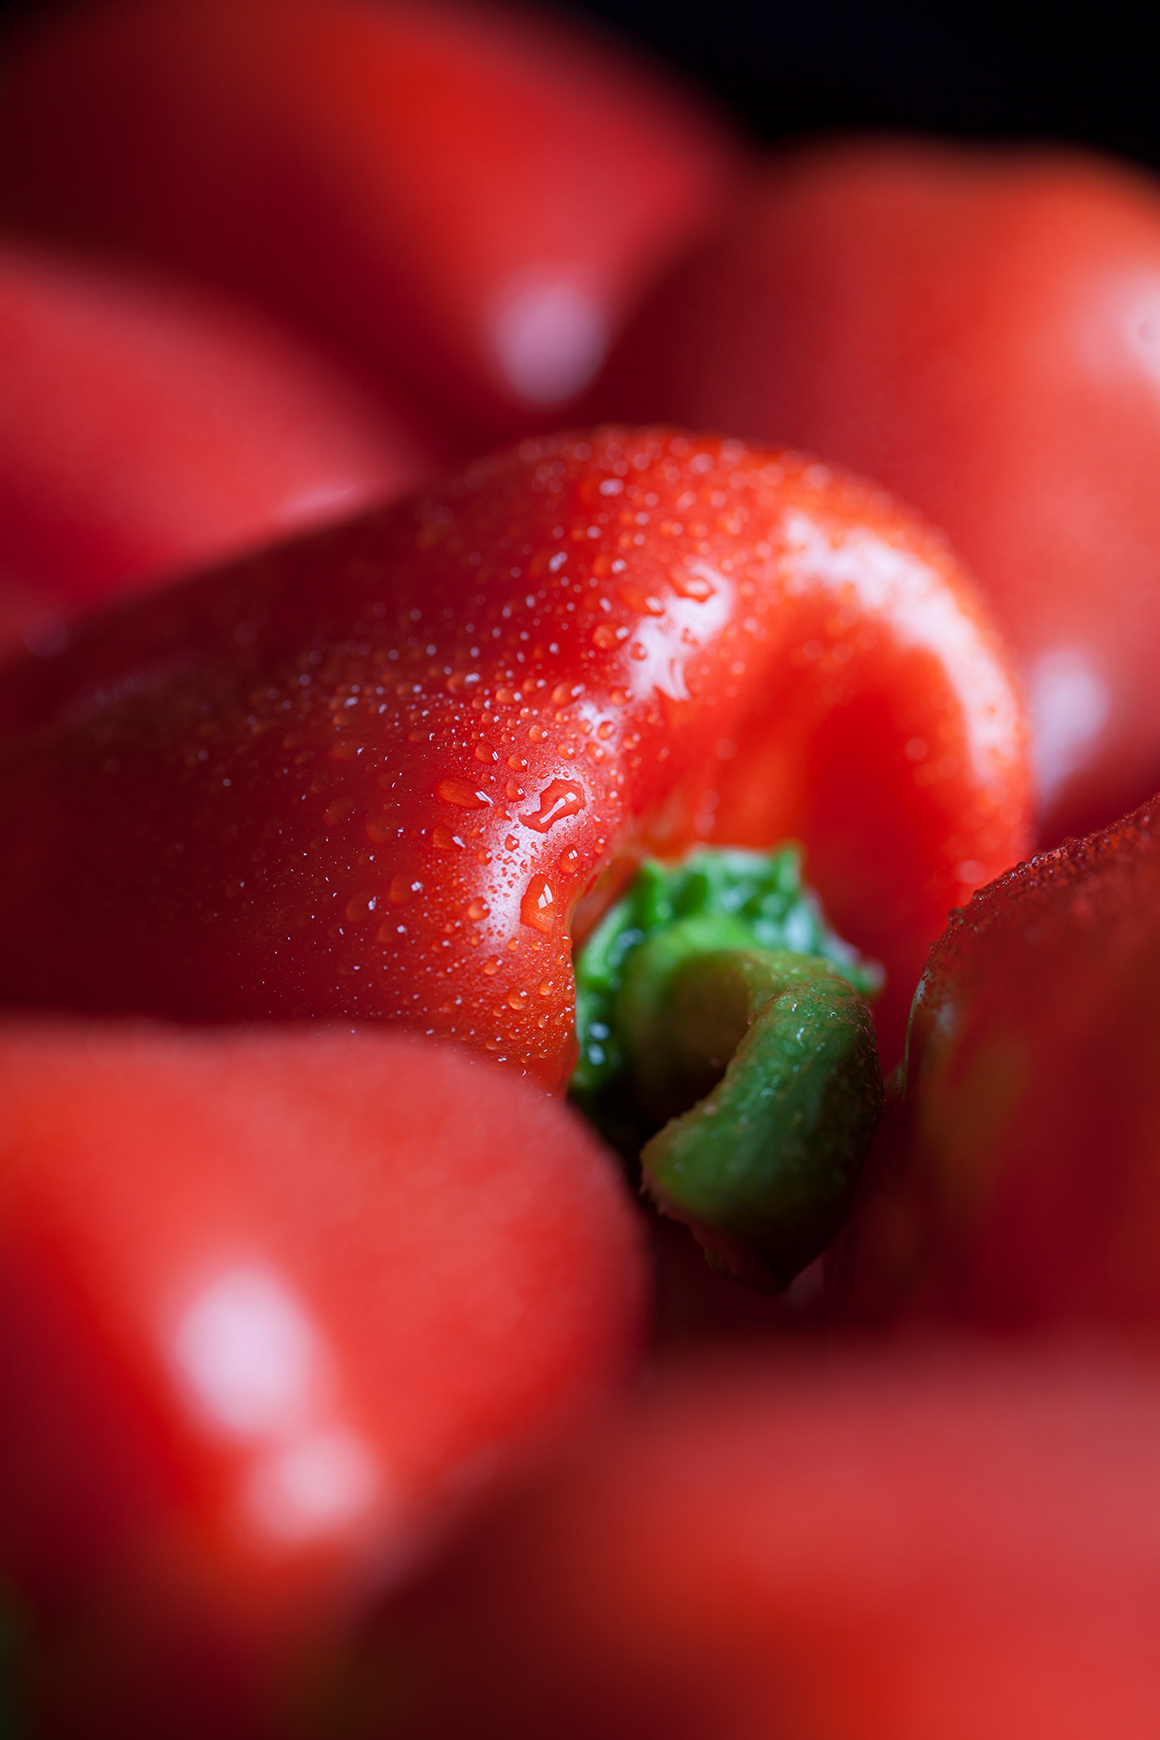 A close up of red capsicum peppers grown by Tangmere Airfield Nurseries.